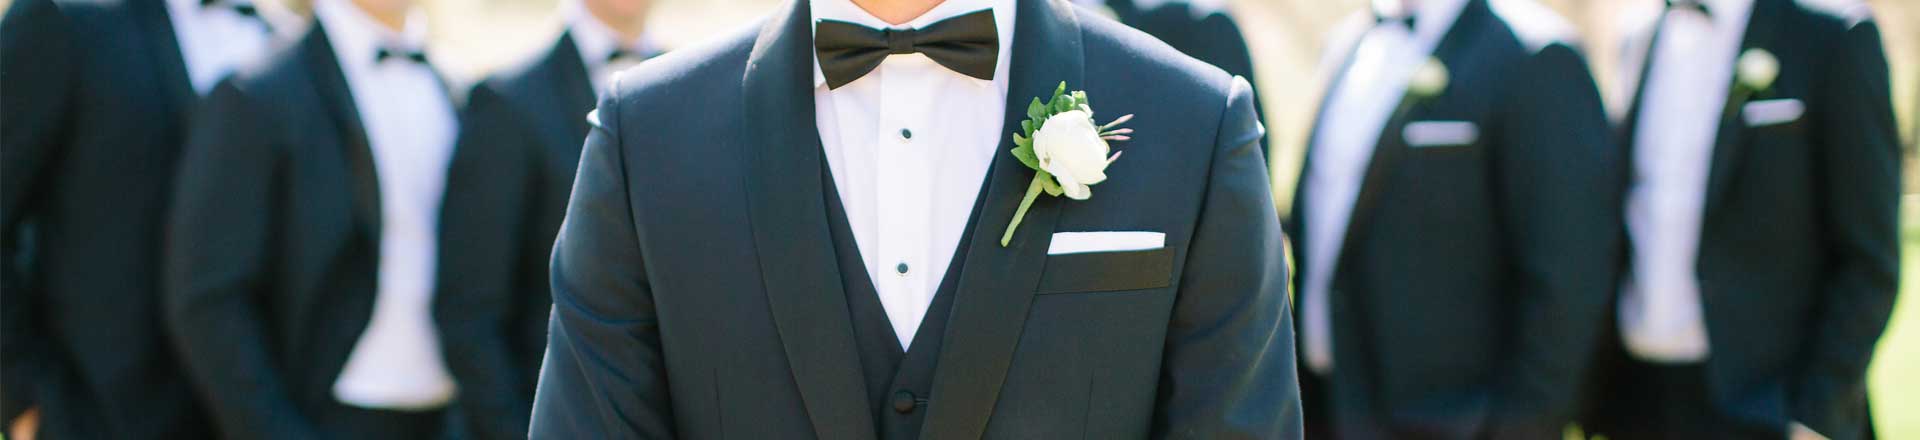 7 Great Gifts for Groomsmen